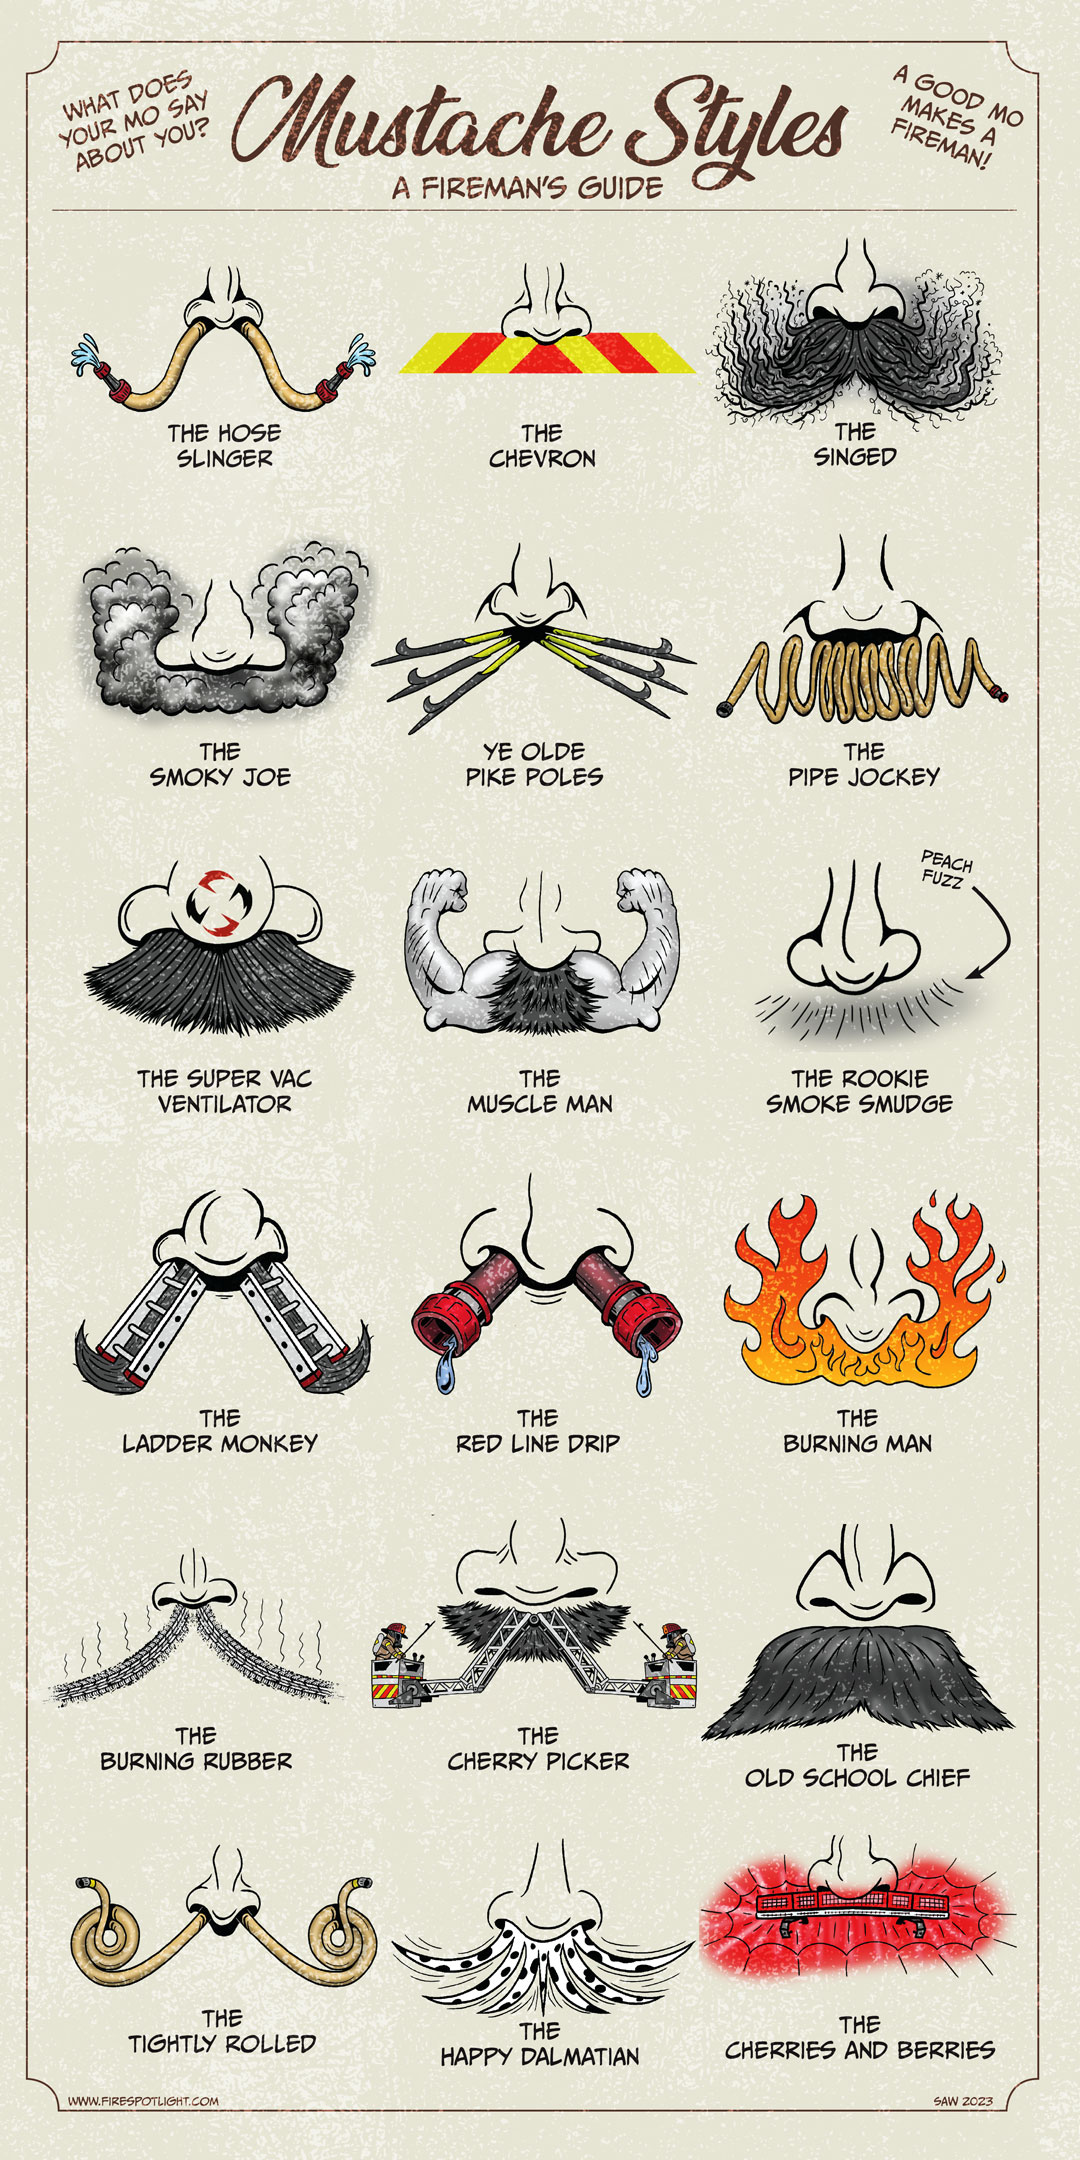 Featured image for “Mustache Types”